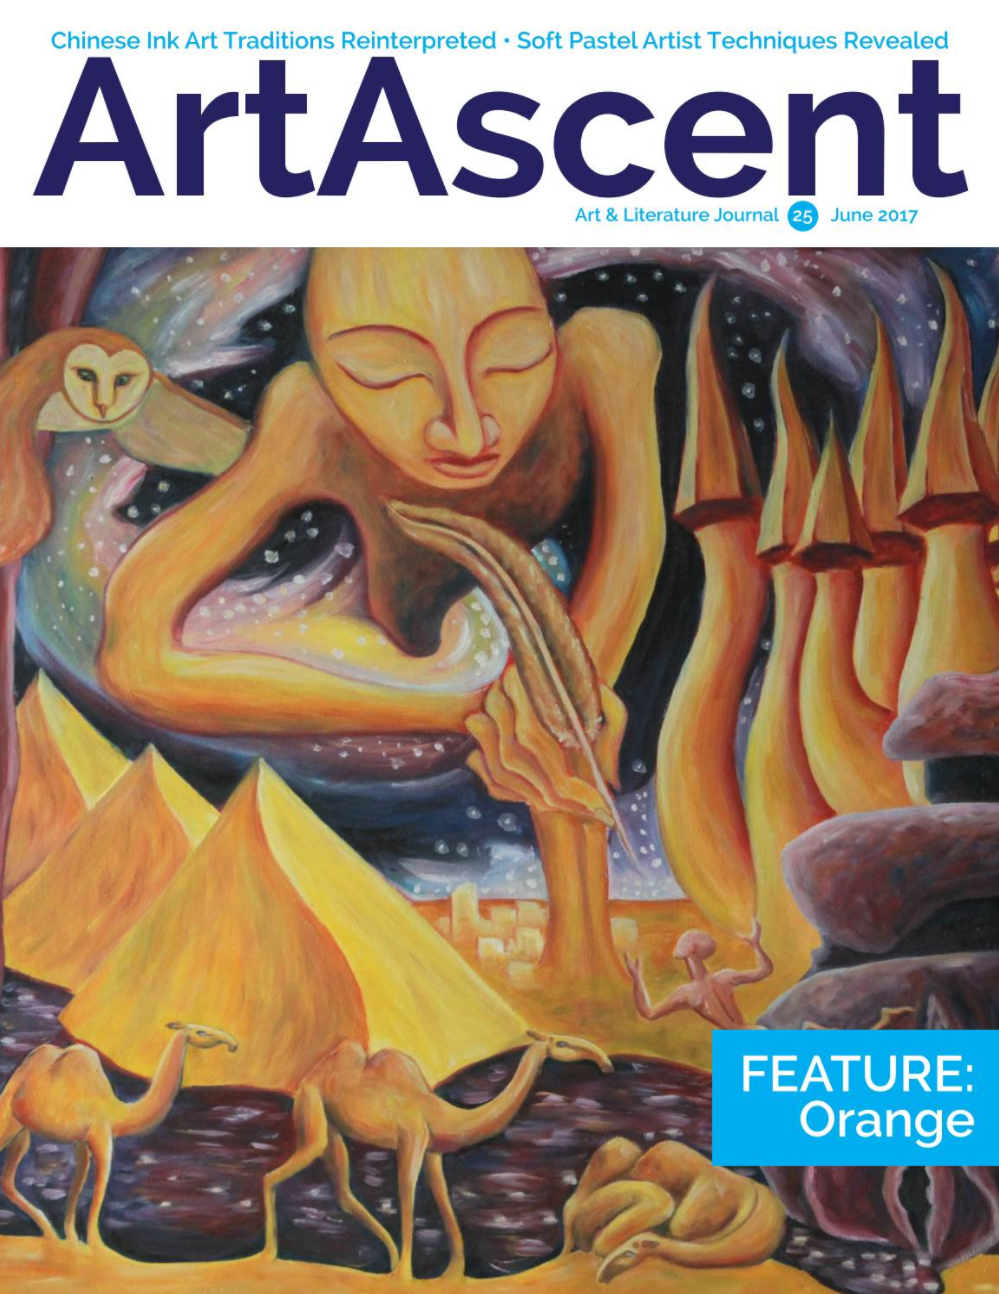 ArtAscent June 2017 Issue - 1.png